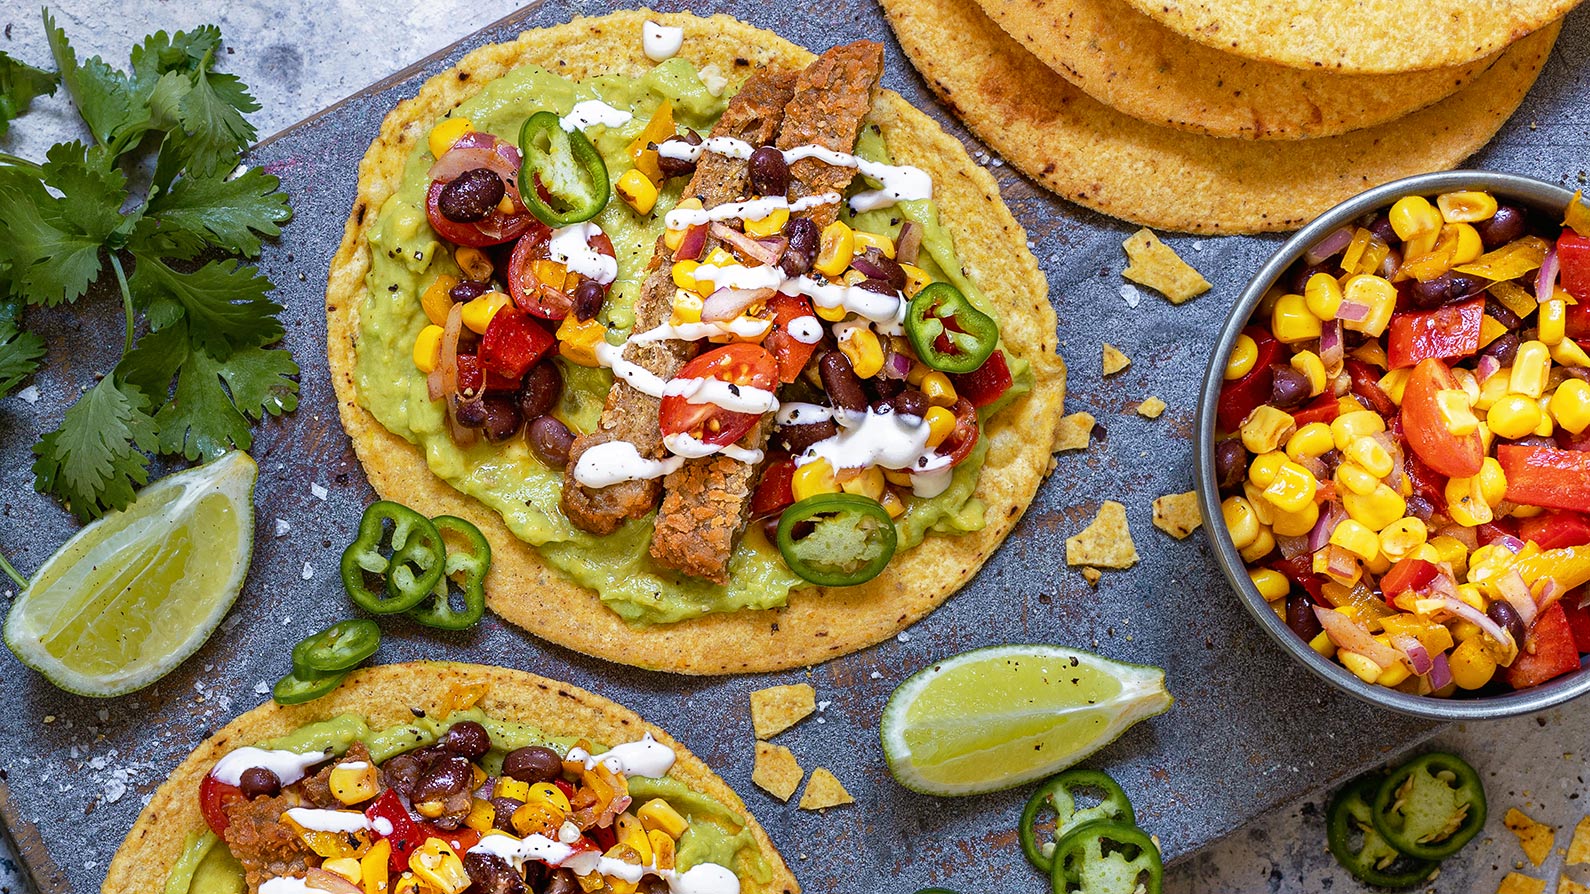 Tostadas get an upgrade with plant-based schnitzel.